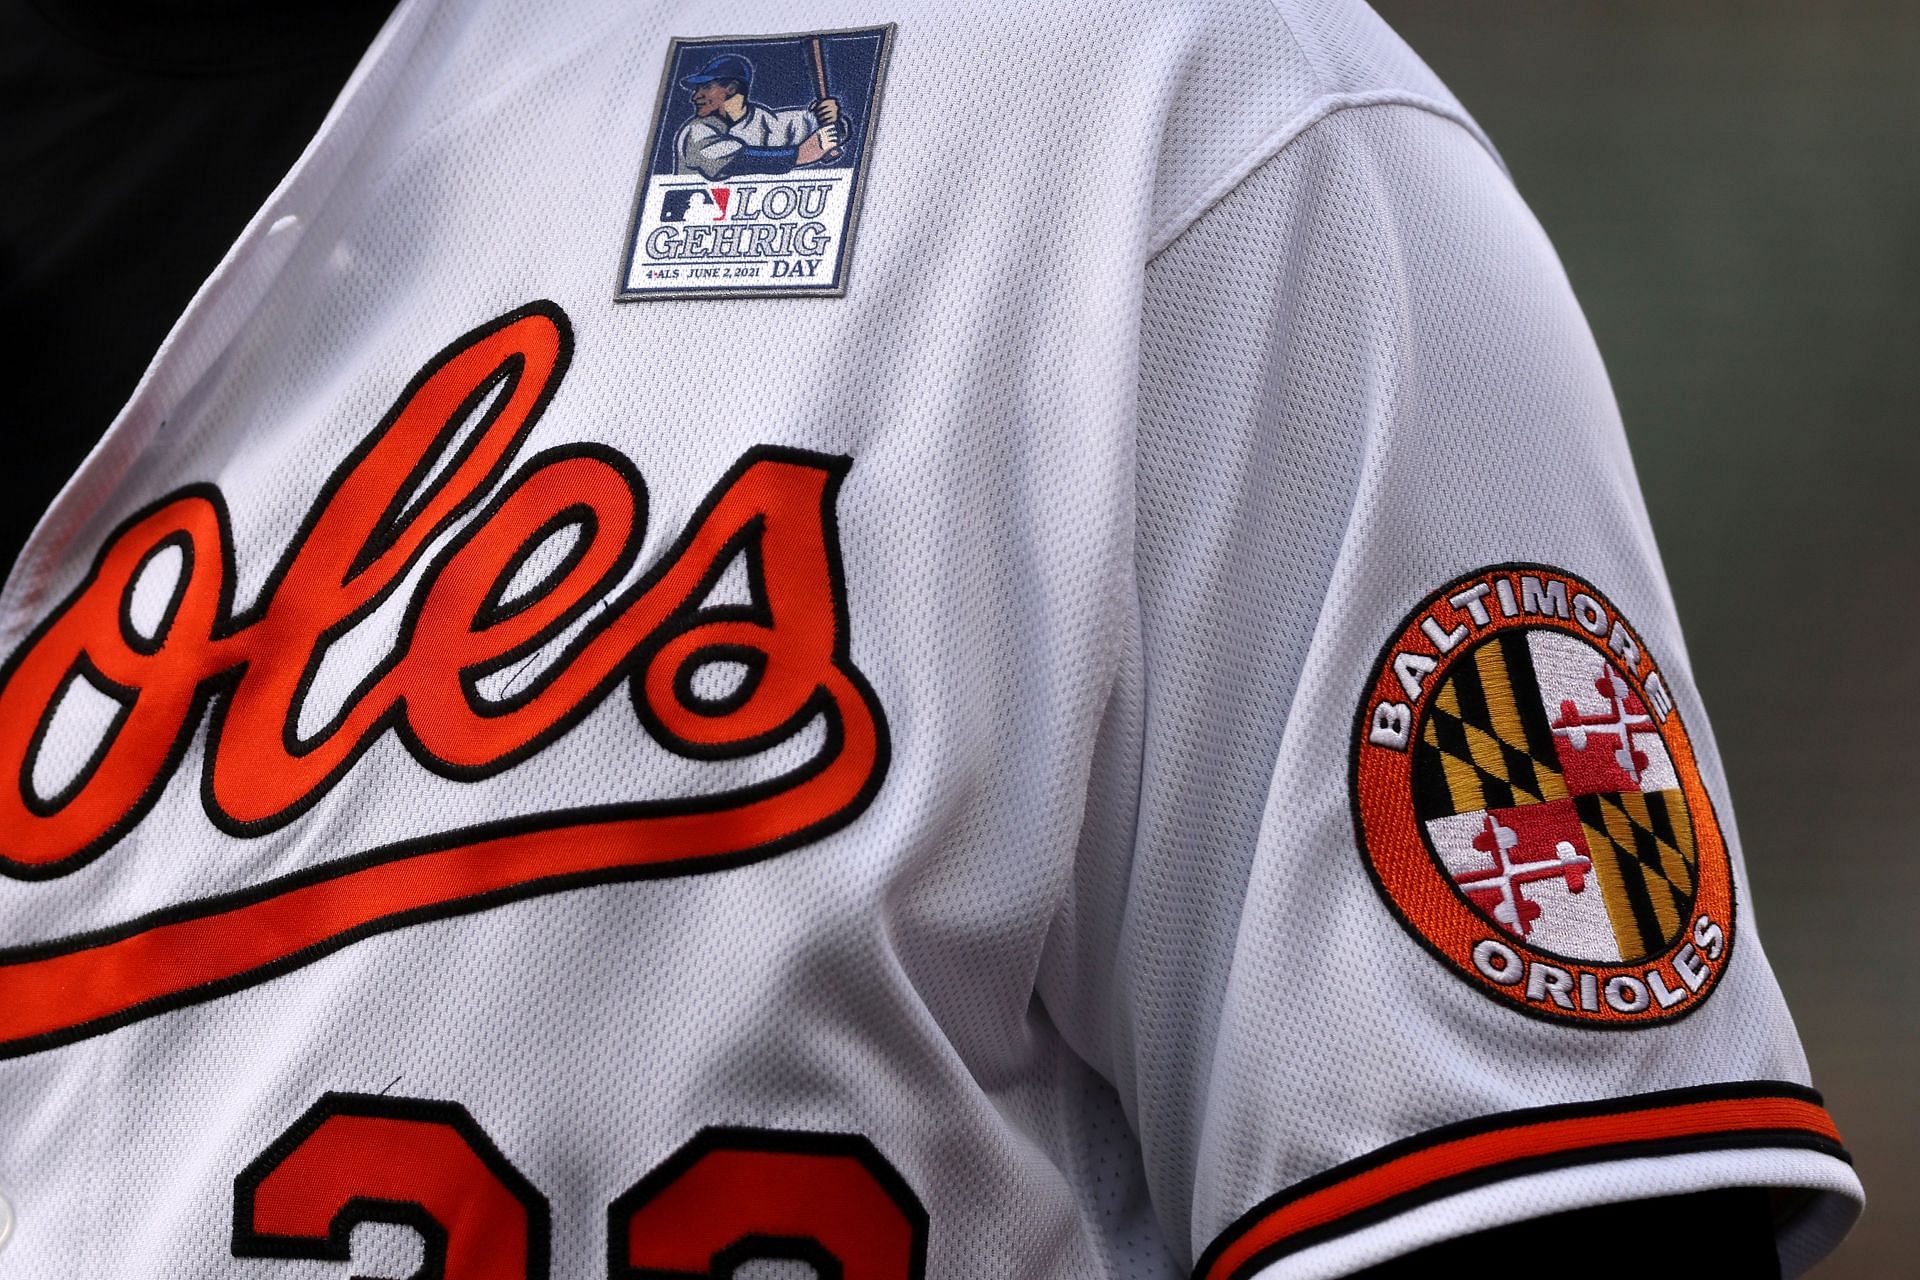 Orioles play first game at Camden Yards in front of fans since riots, wear  uniforms with 'Baltimore' across chest – New York Daily News